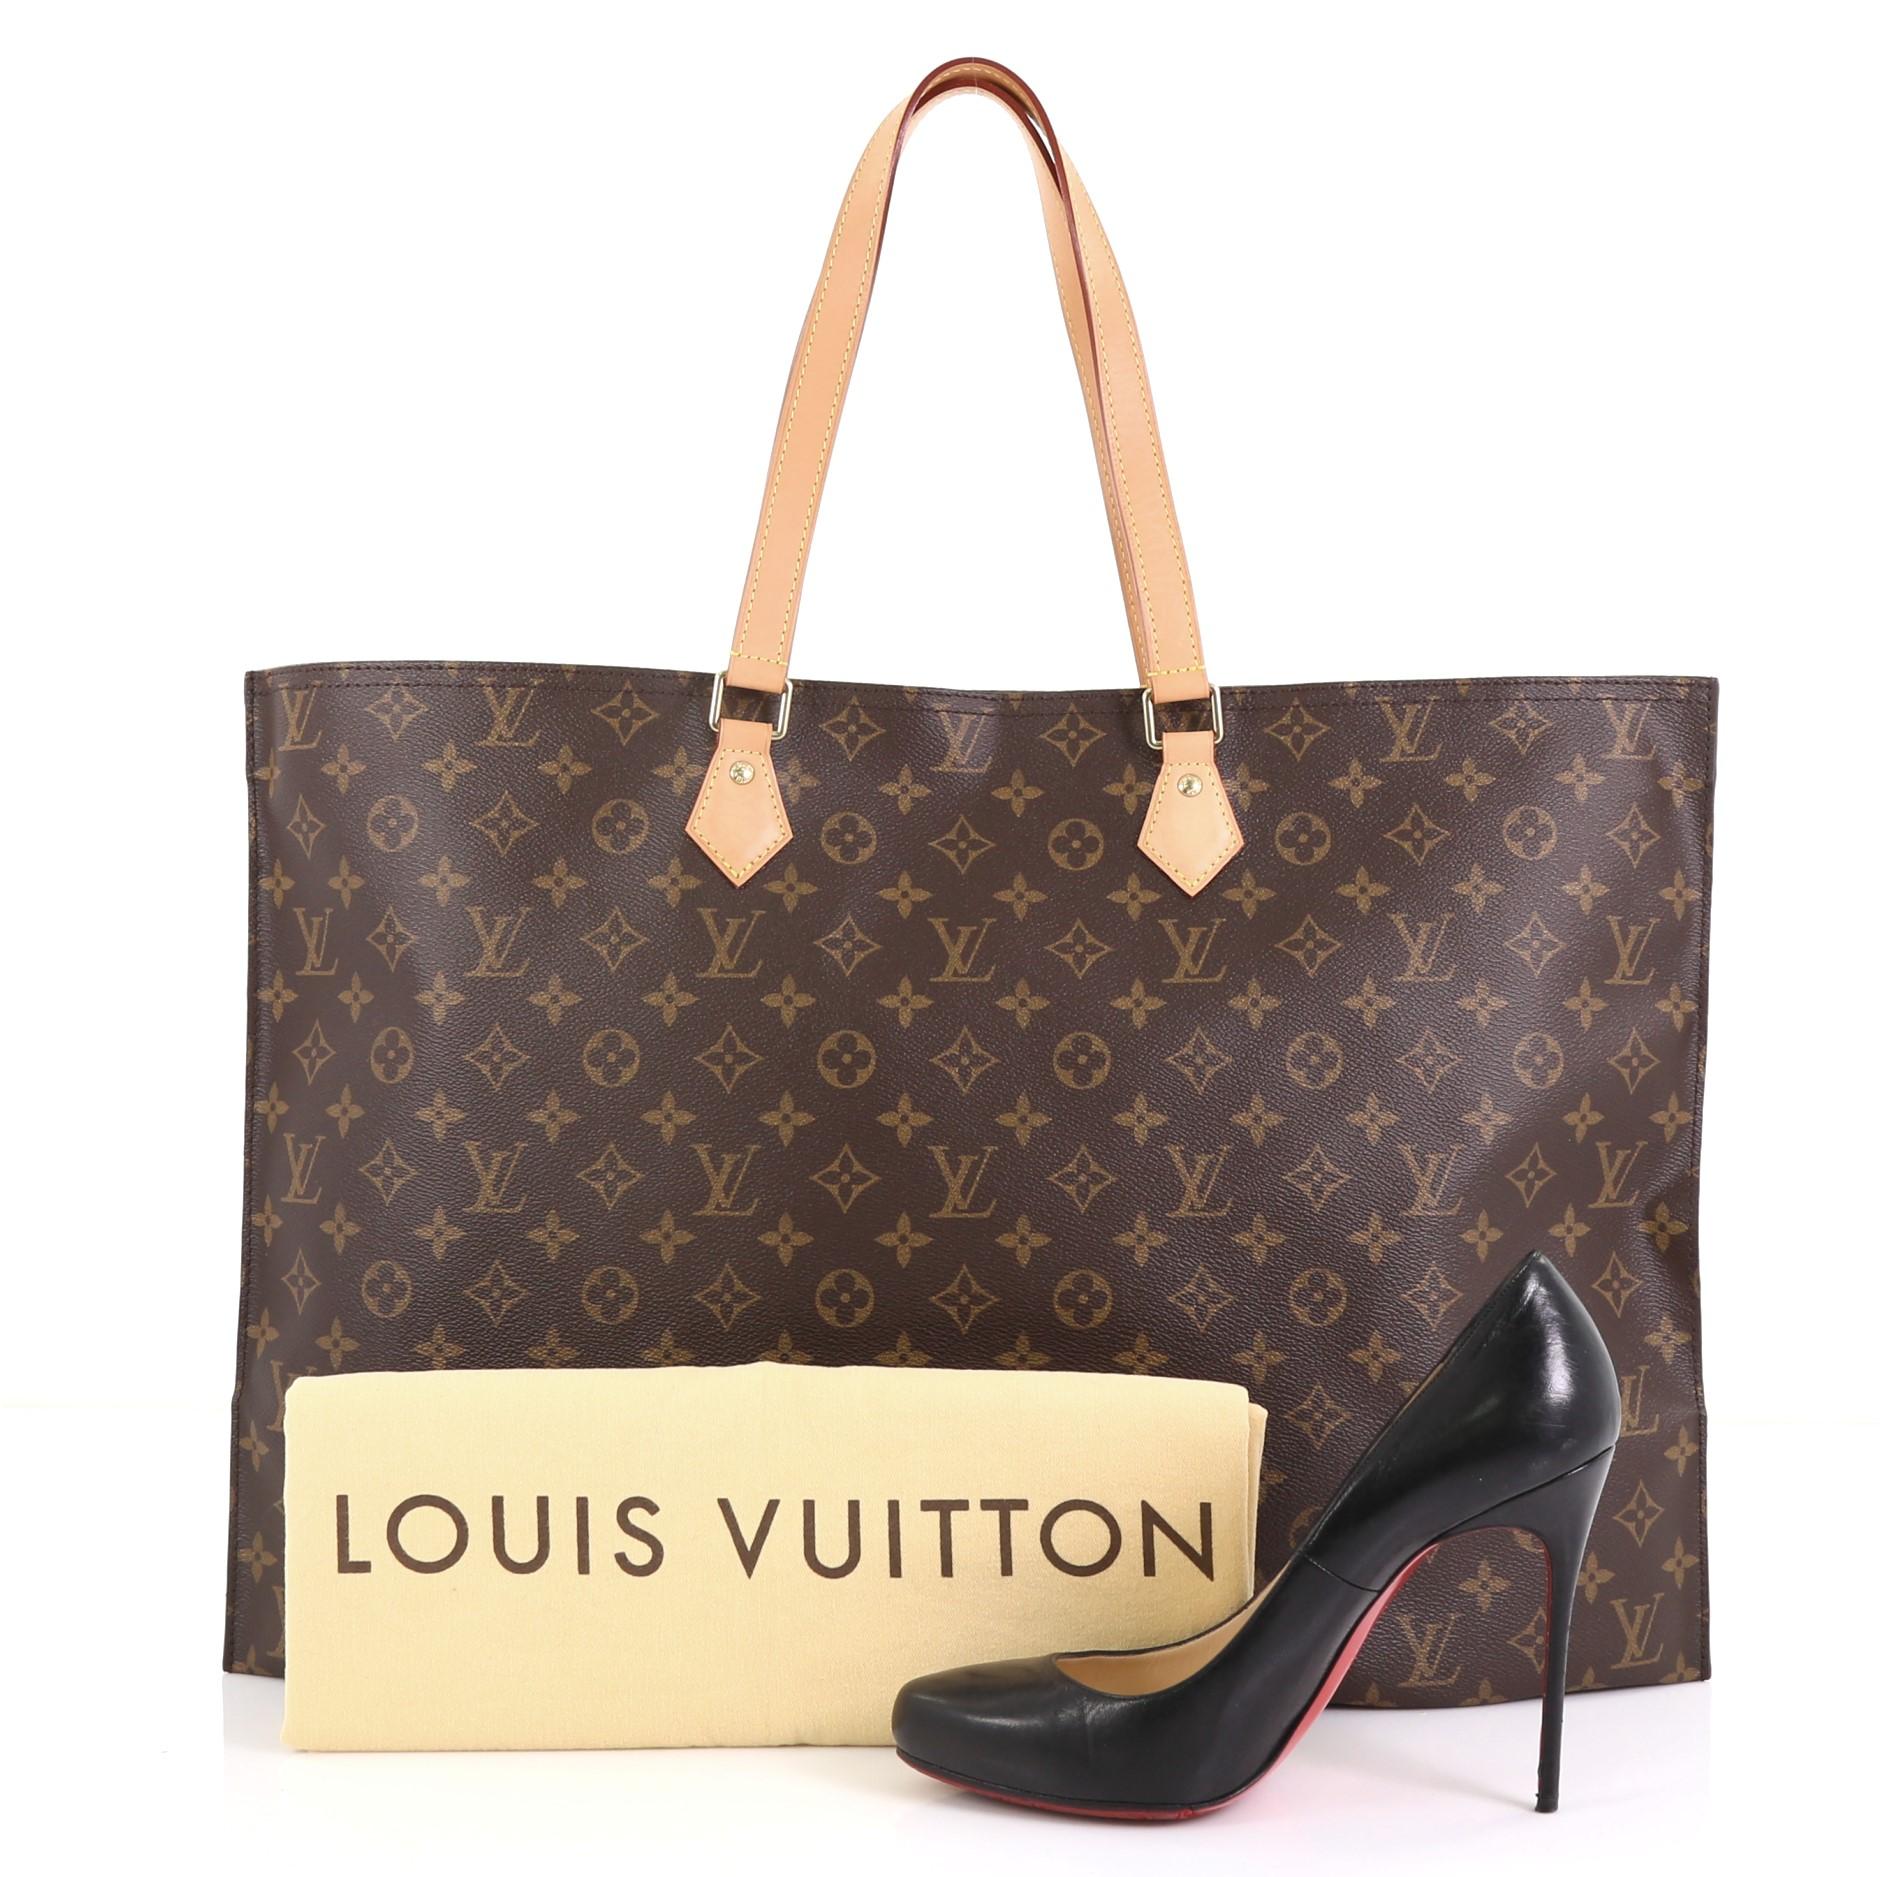 This Louis Vuitton All In Handbag Monogram Canvas GM, crafted in brown monogram coated canvas, features dual flat leather handles and gold-tone hardware. Its zip closure opens to a brown fabric interior with zip pocket. Authenticity code reads: